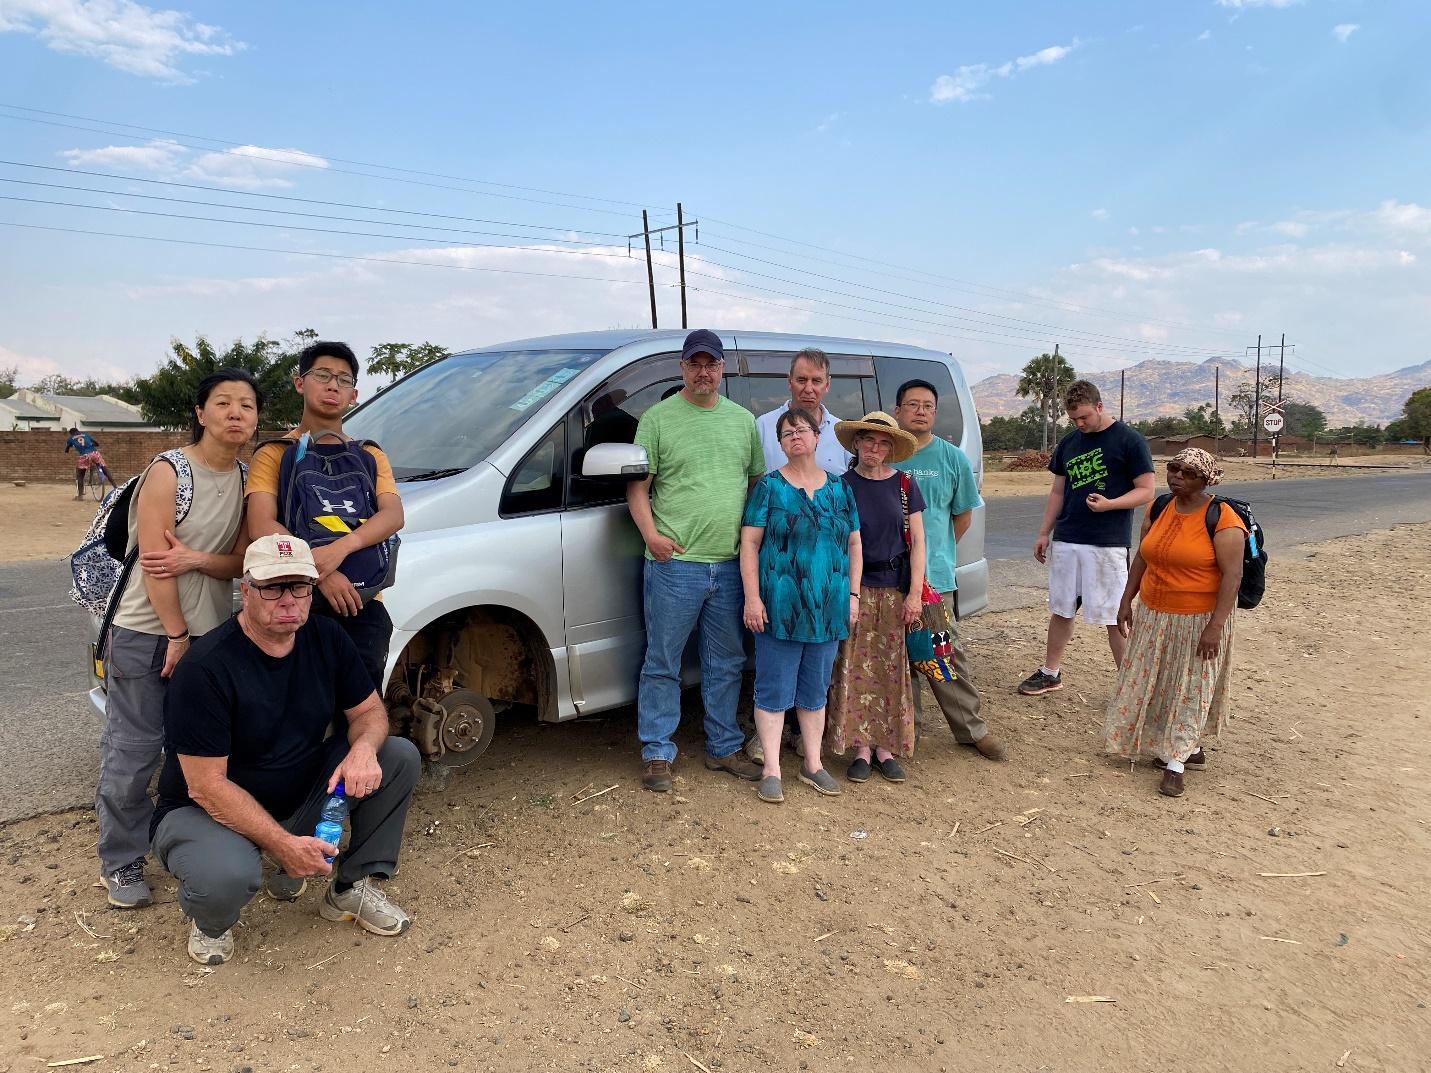 A group of people standing next to a car

Description automatically generated